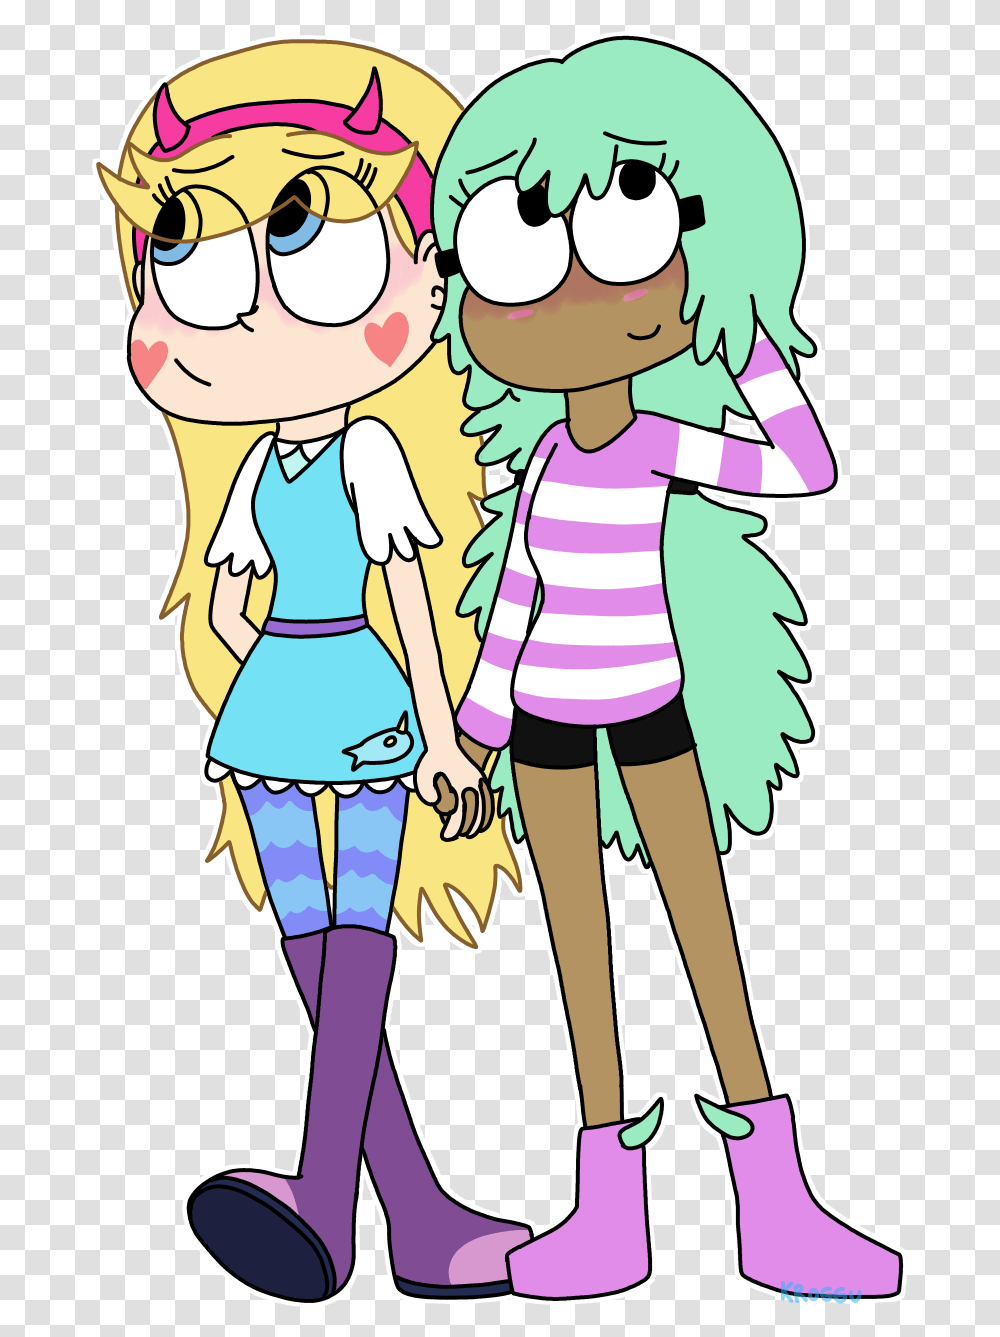 Star Vs The Forces Of Evil Ships Wikia Svtfoe Stelly, Person, Human, People Transparent Png